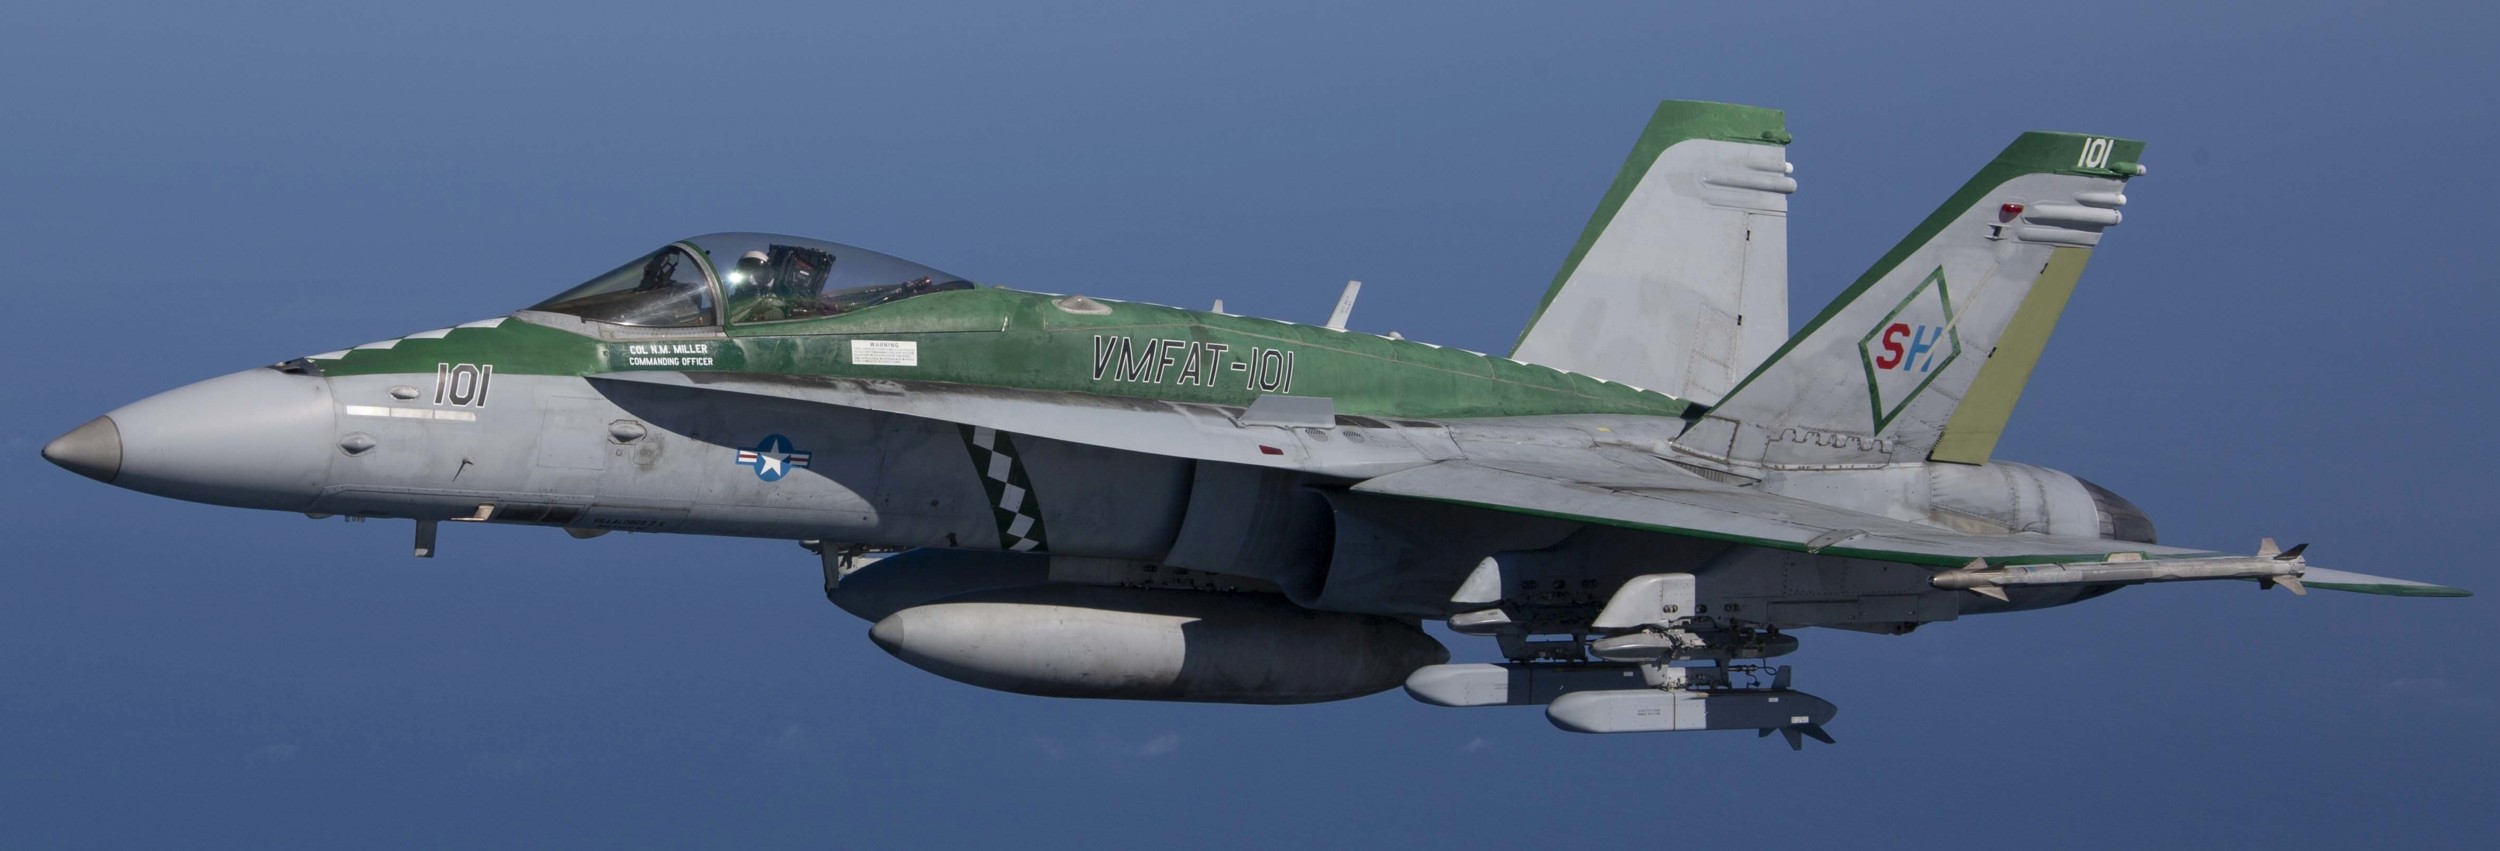 vmfat-101 sharpshooters marine fighter attack squadron usmc f/a-18 hornet replacement 95 exercise winter fury